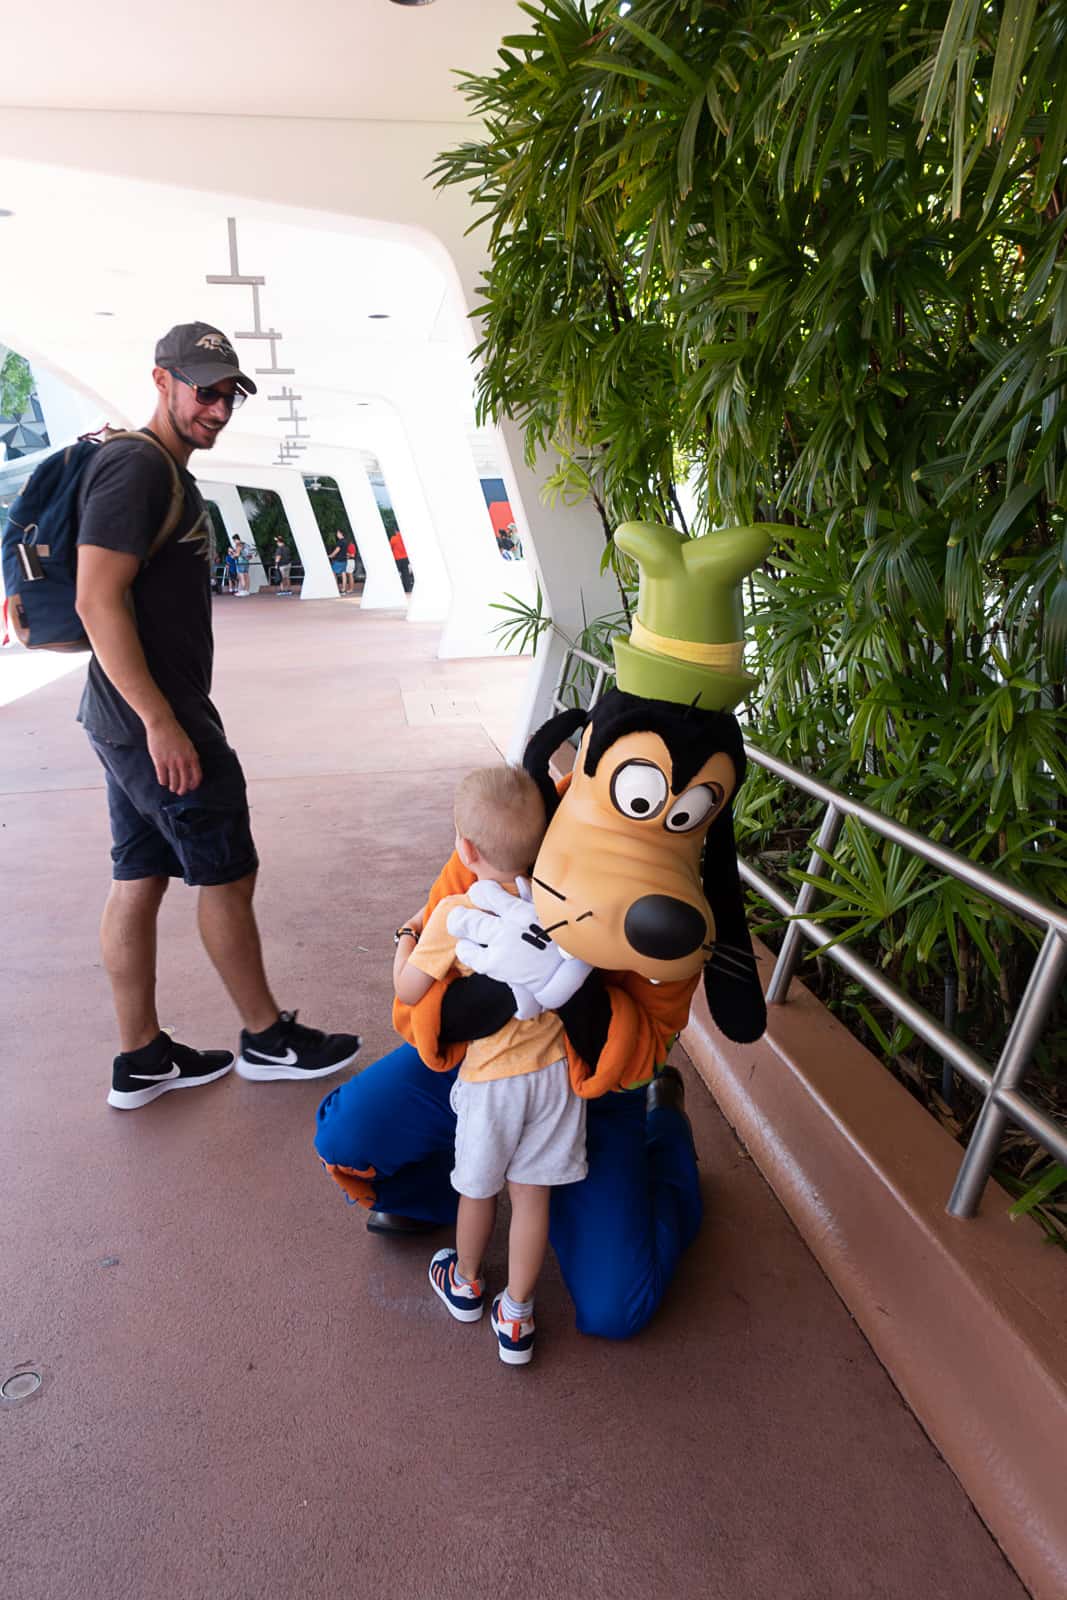 Meeting a Disney World character where the entrance to Epcot is